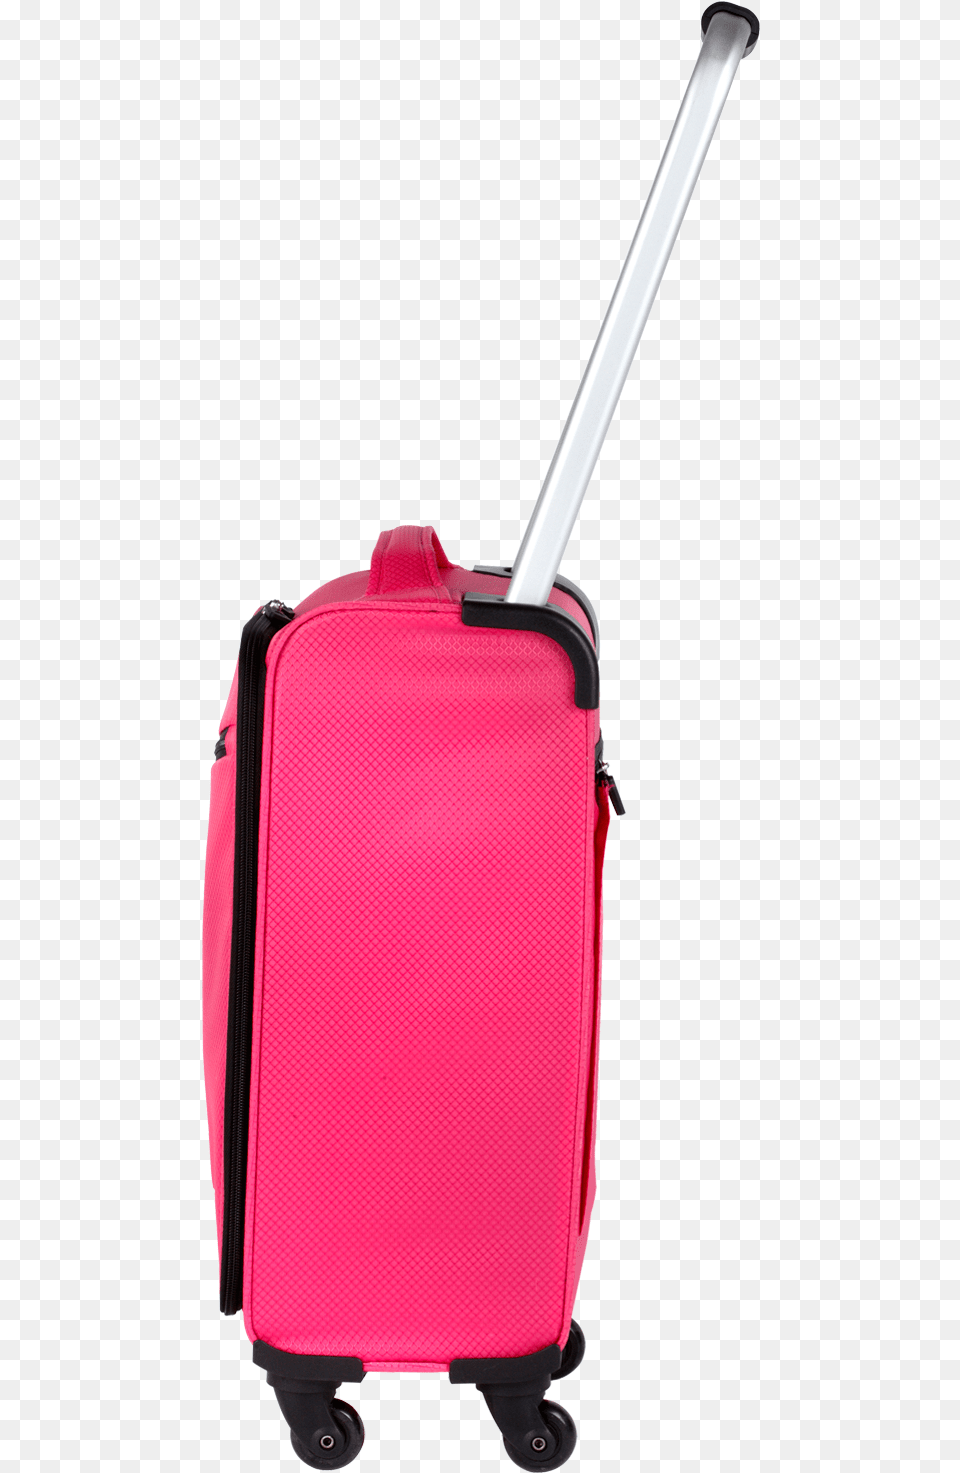 Zframe Super Lightweight 18quot Pink Luggage Suitcase Pink Luggage, Baggage Png Image